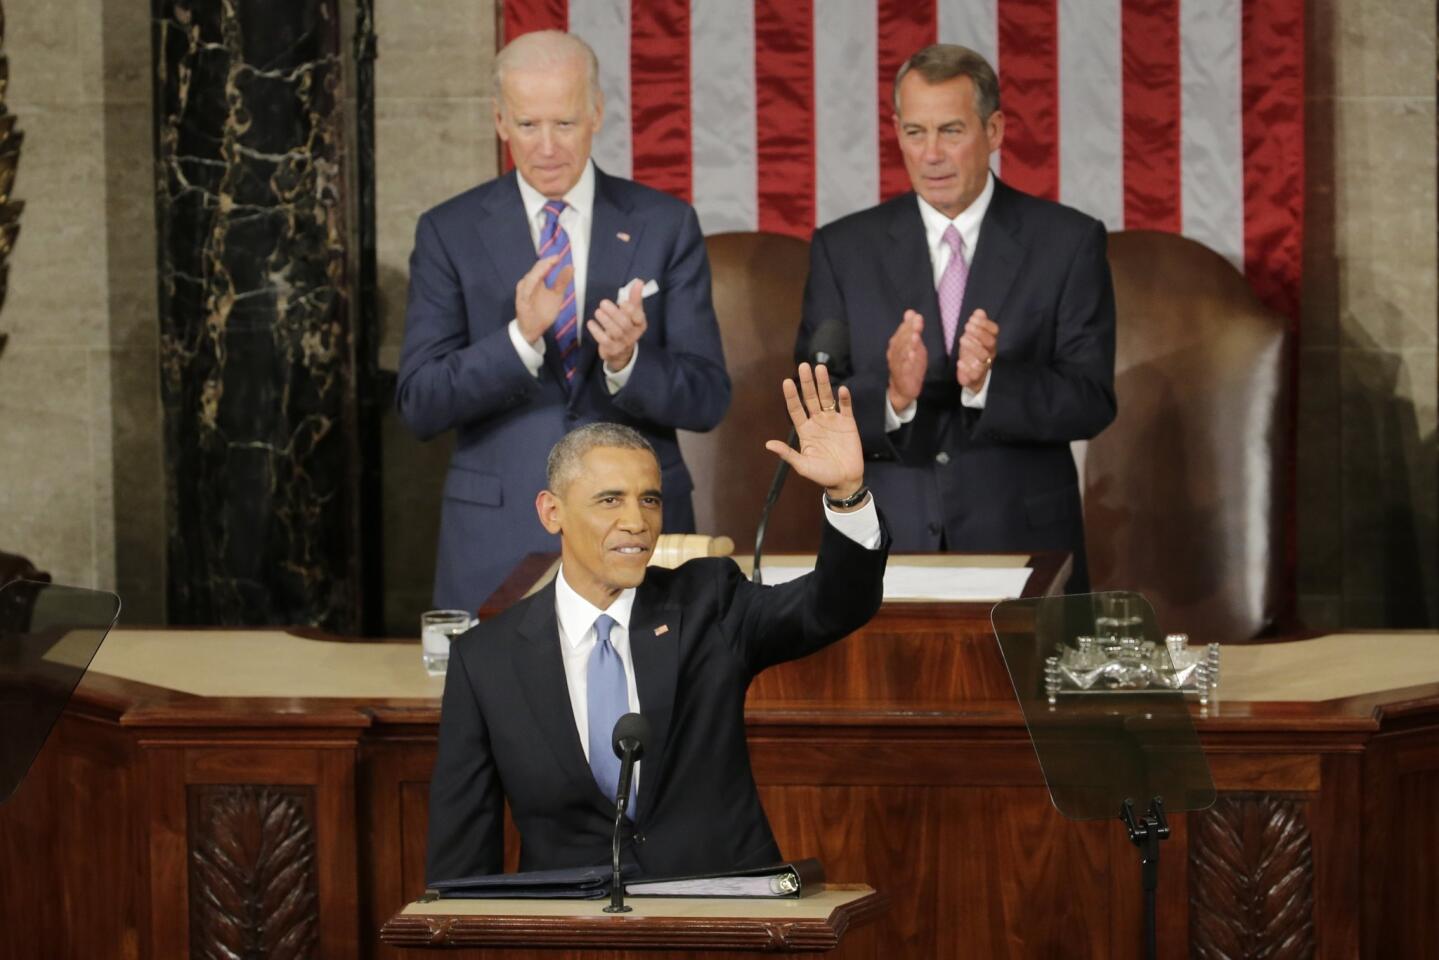 President Obama waves before giving his State of the Union address.